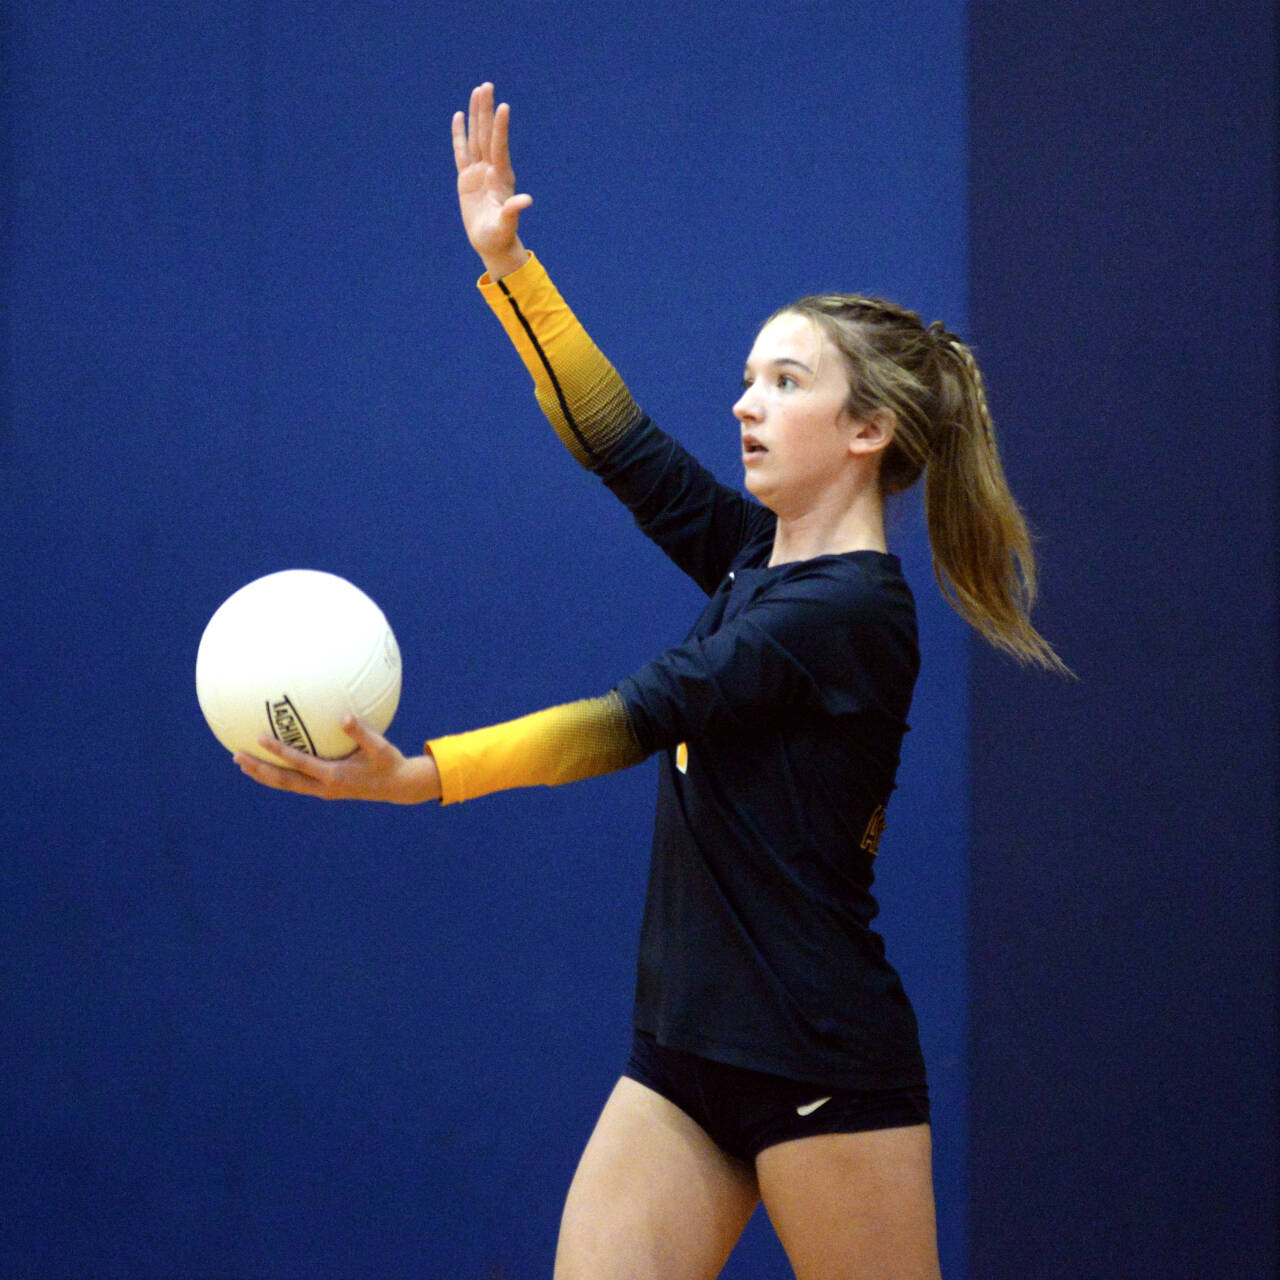 RYAN SPARKS | THE DAILY WORLD Aberdeen senior Claire Mottinger readies a serve during a straight-set win over Rochester on Thursday in Aberdeen.